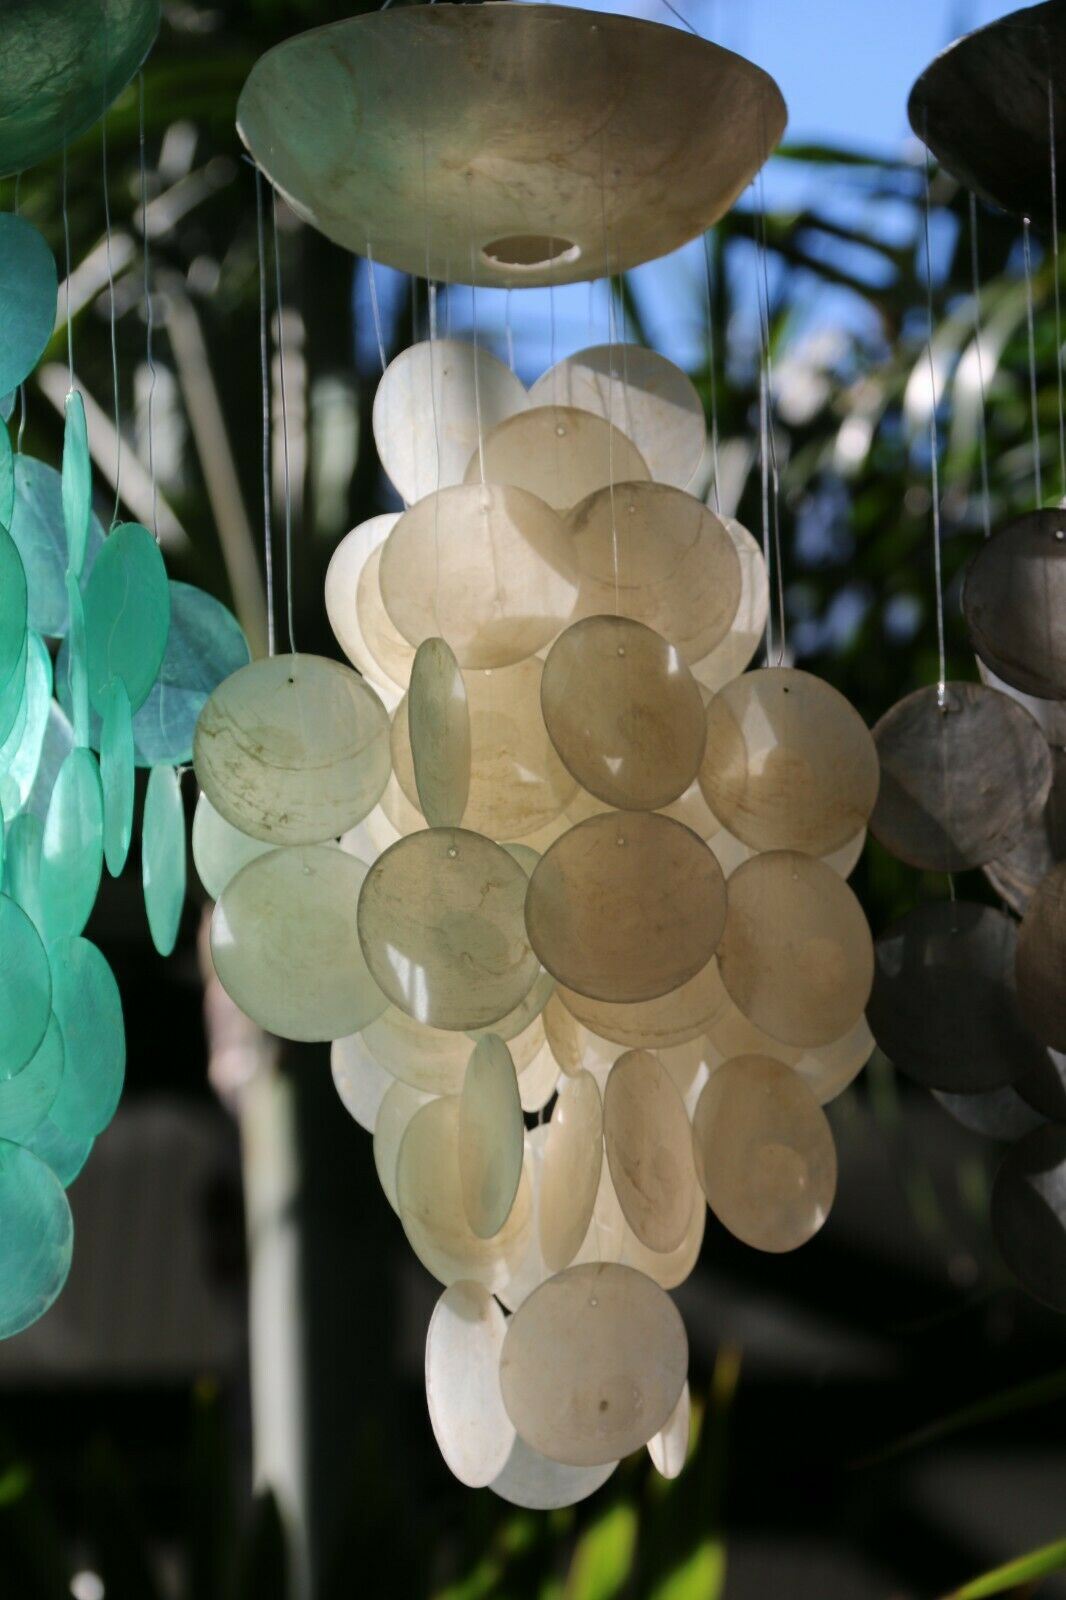 NEW Balinese Capiz Shell Mobile / Wind Chime - White / Sound GREAT!!